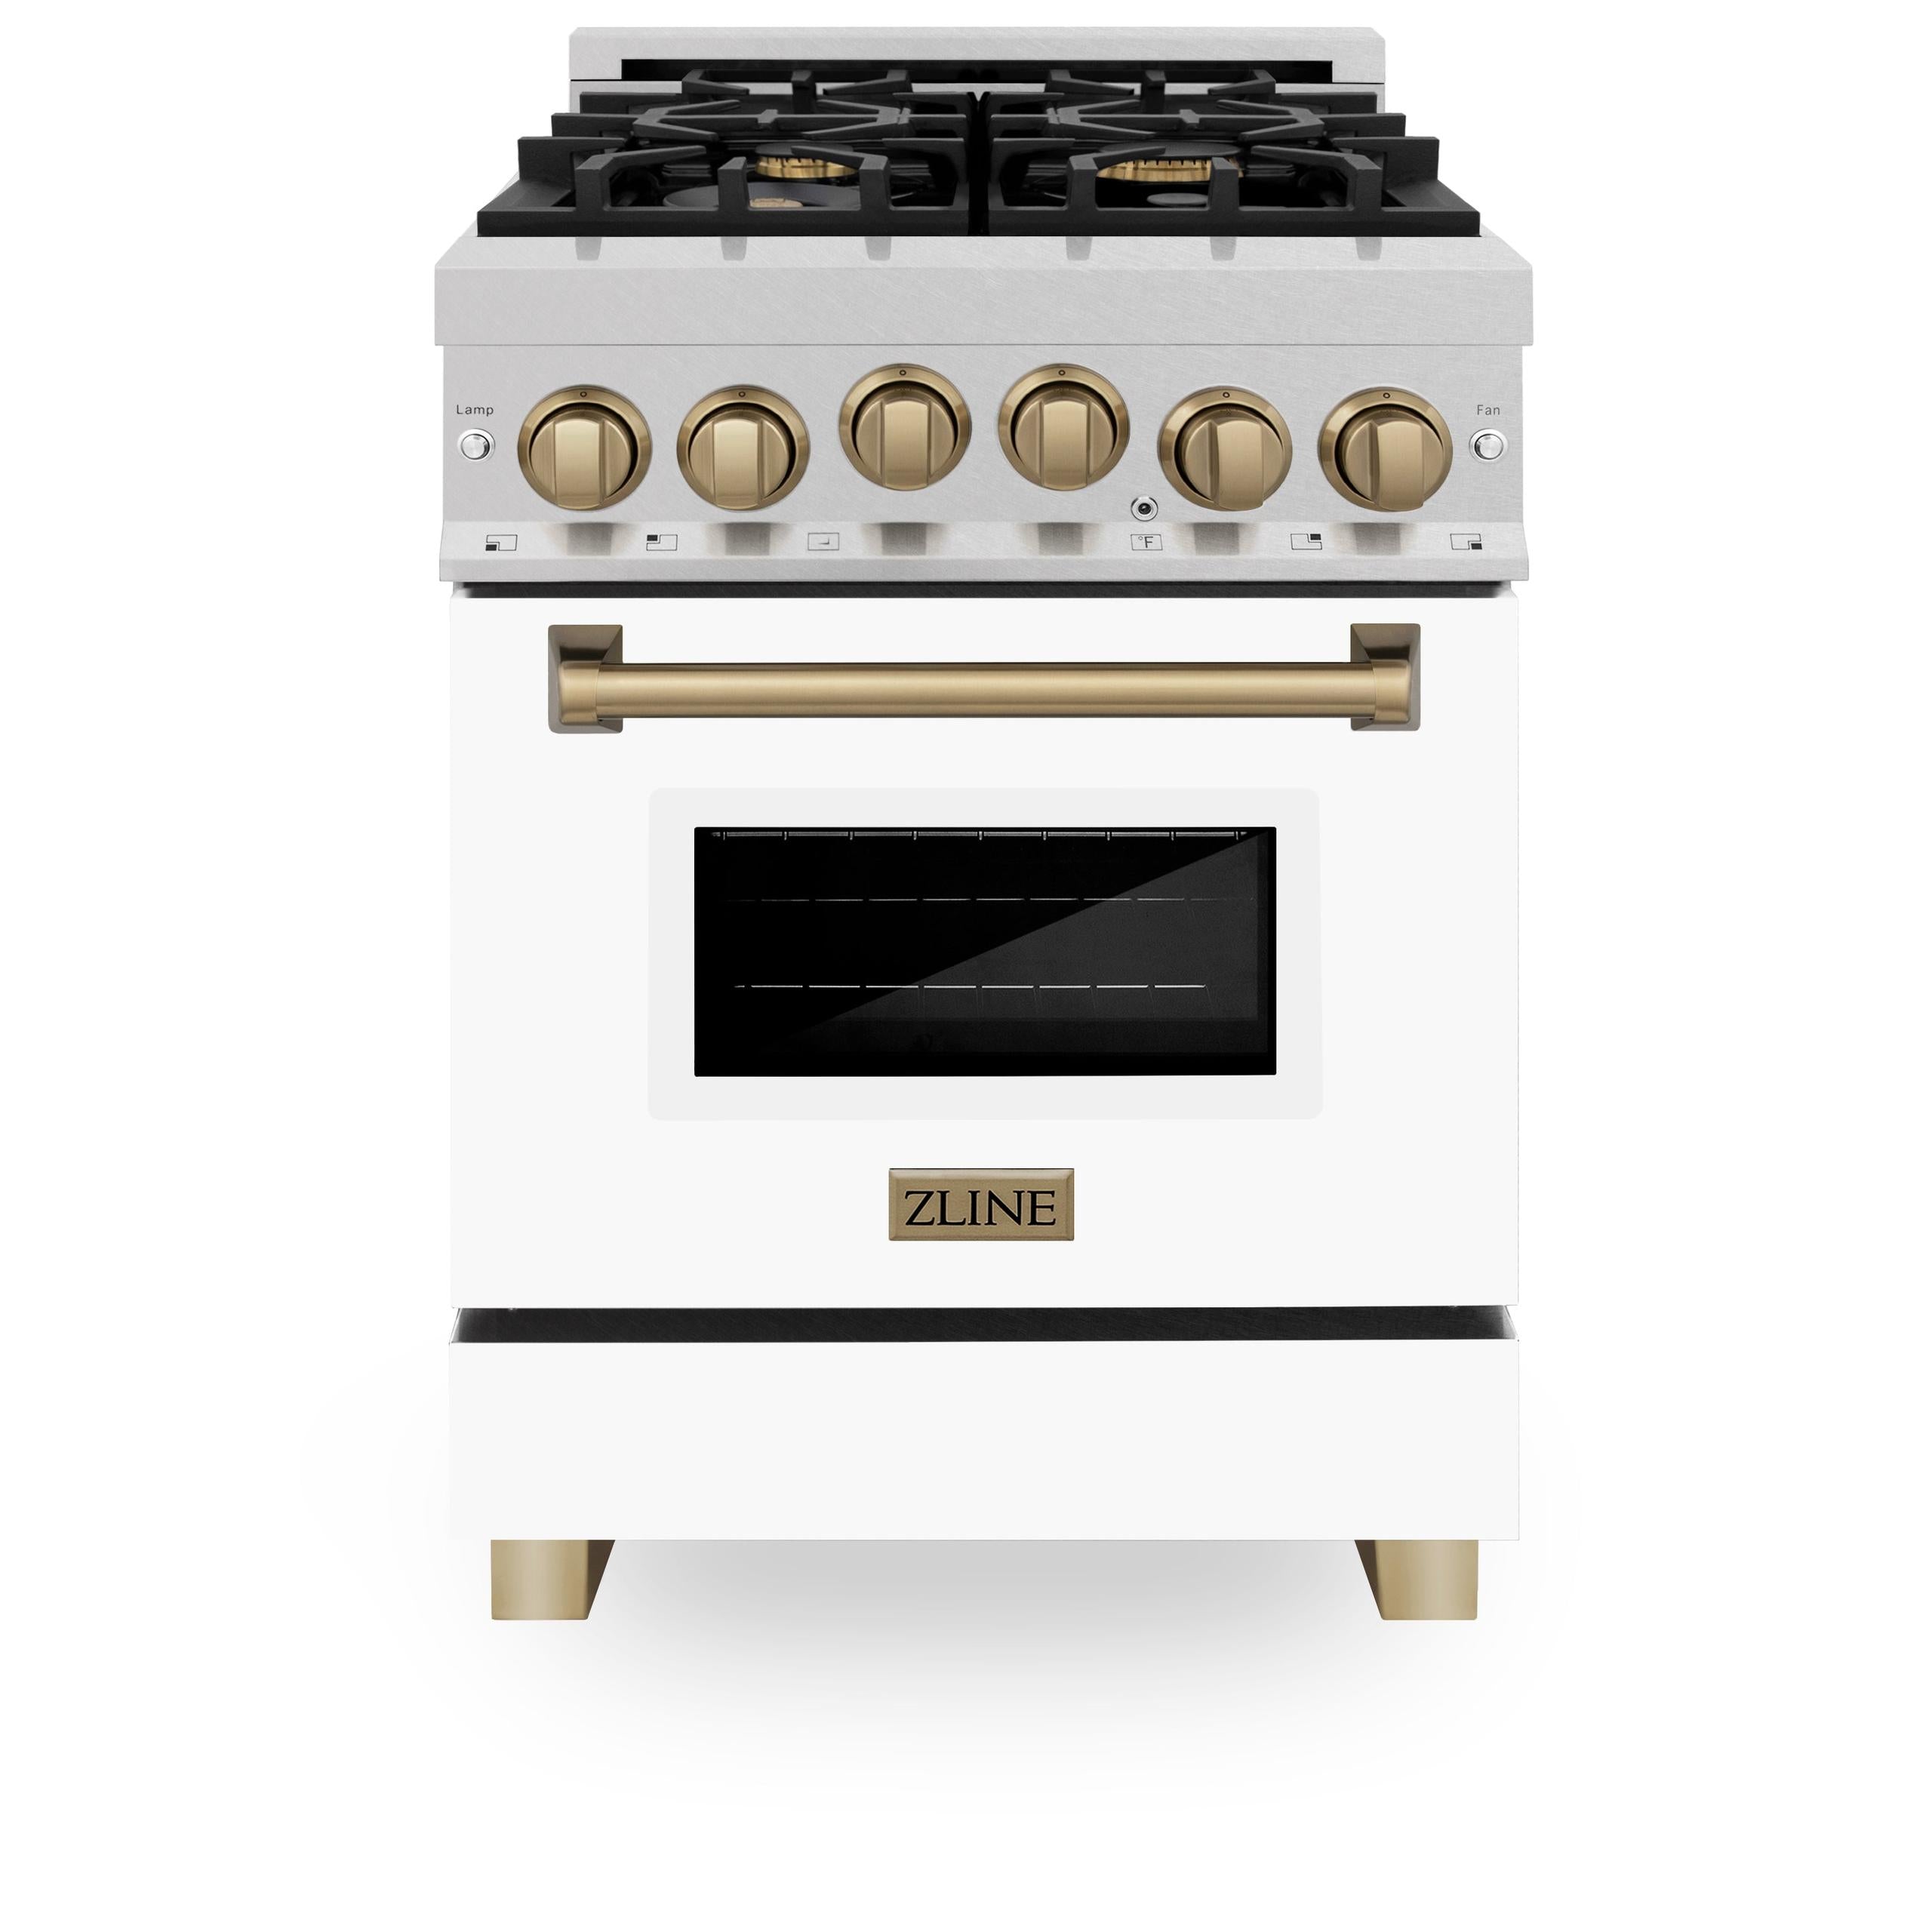 ZLINE KITCHEN AND BATH RGSZWM24CB ZLINE Autograph Edition 24" 2.8 cu. ft. Range with Gas Stove and Gas Oven in DuraSnow R Stainless Steel with White Matte Door and Accents Color: Champagne Bronze